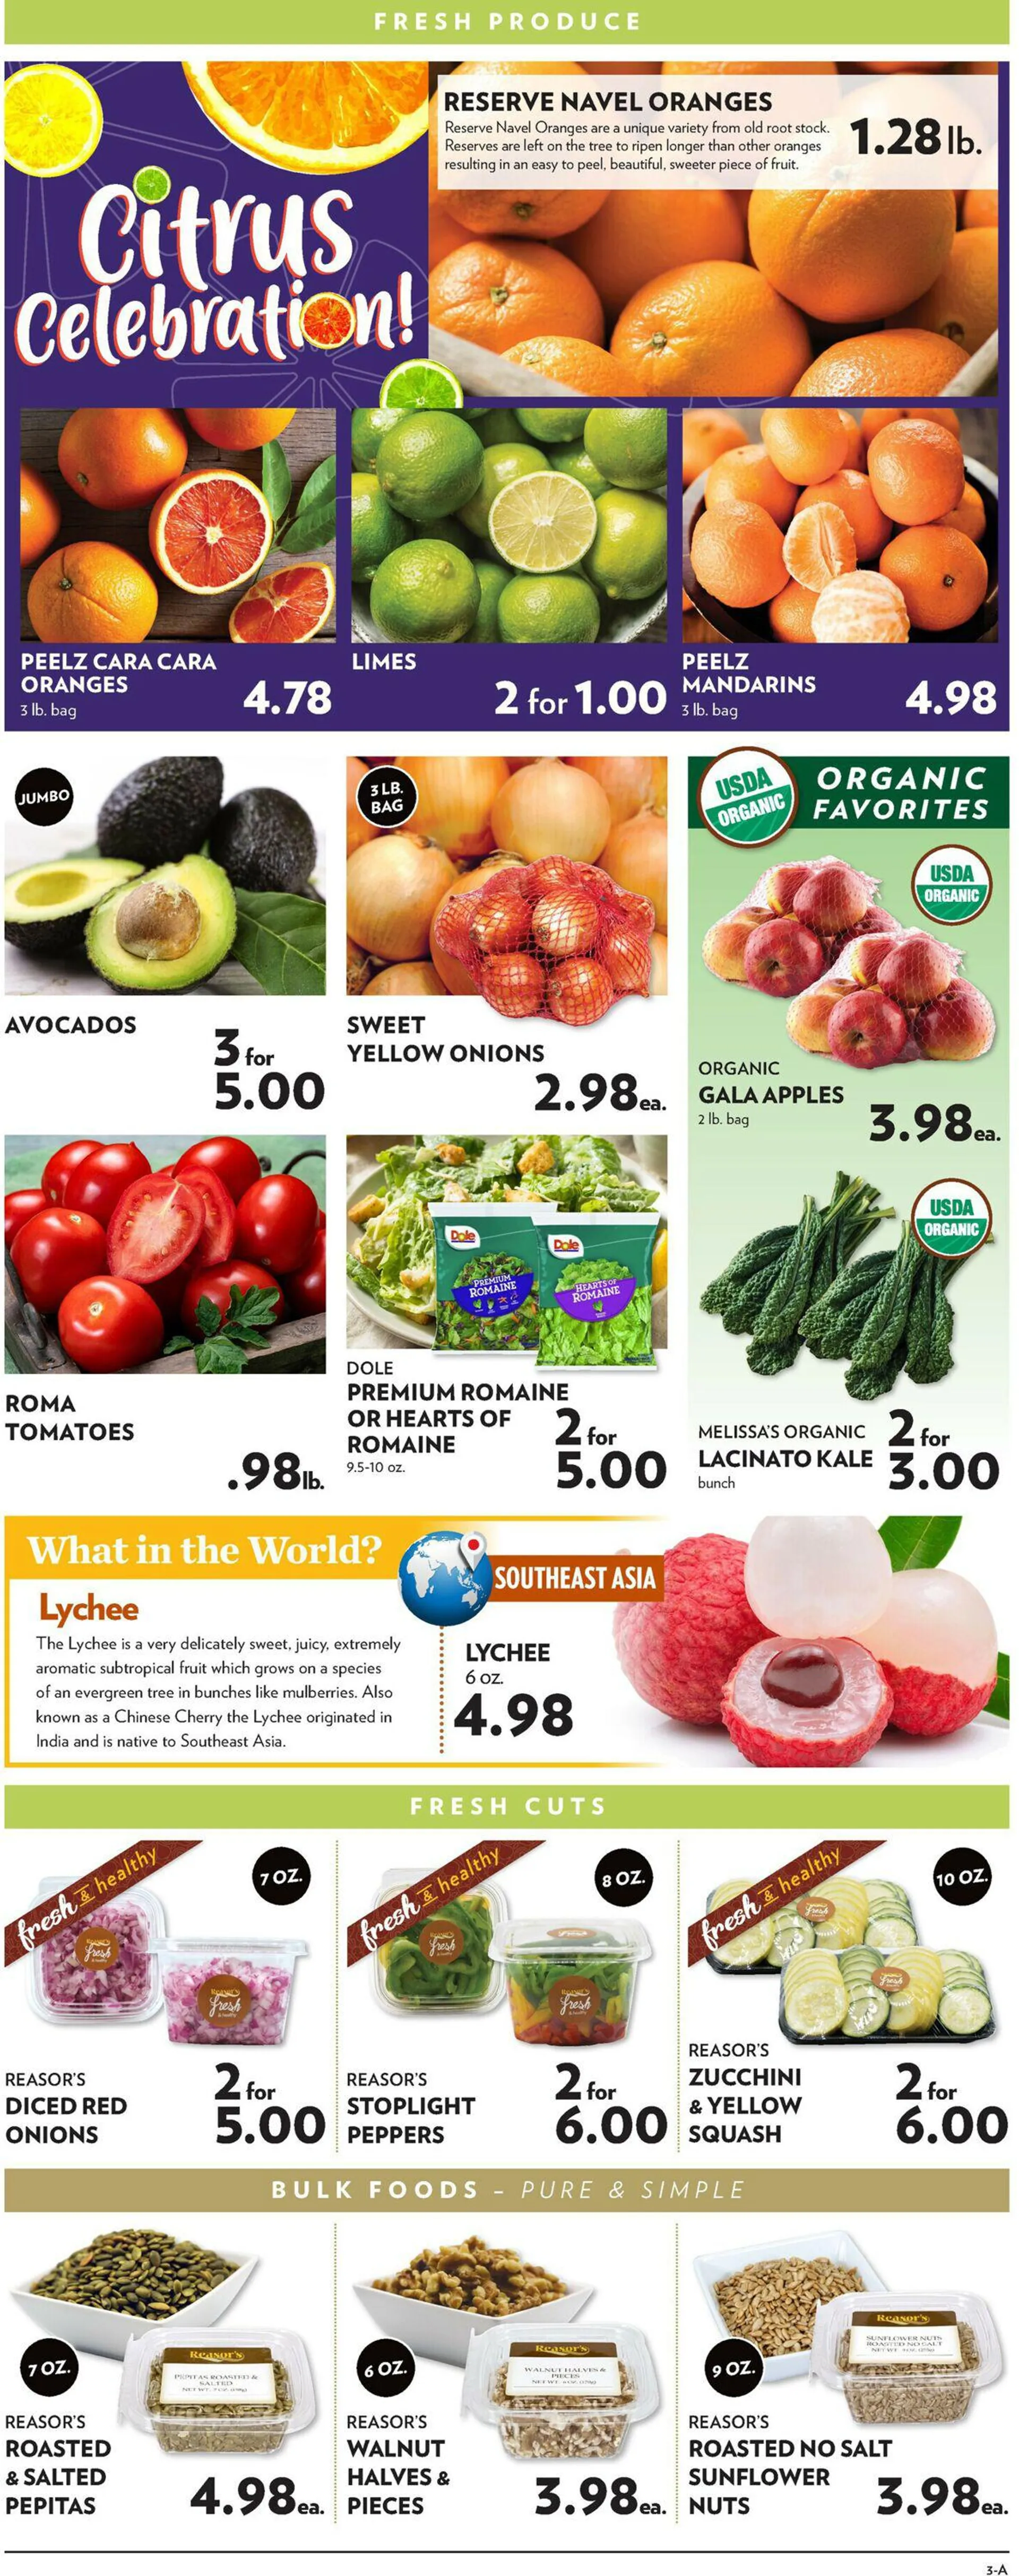 Reasors Current weekly ad - 3